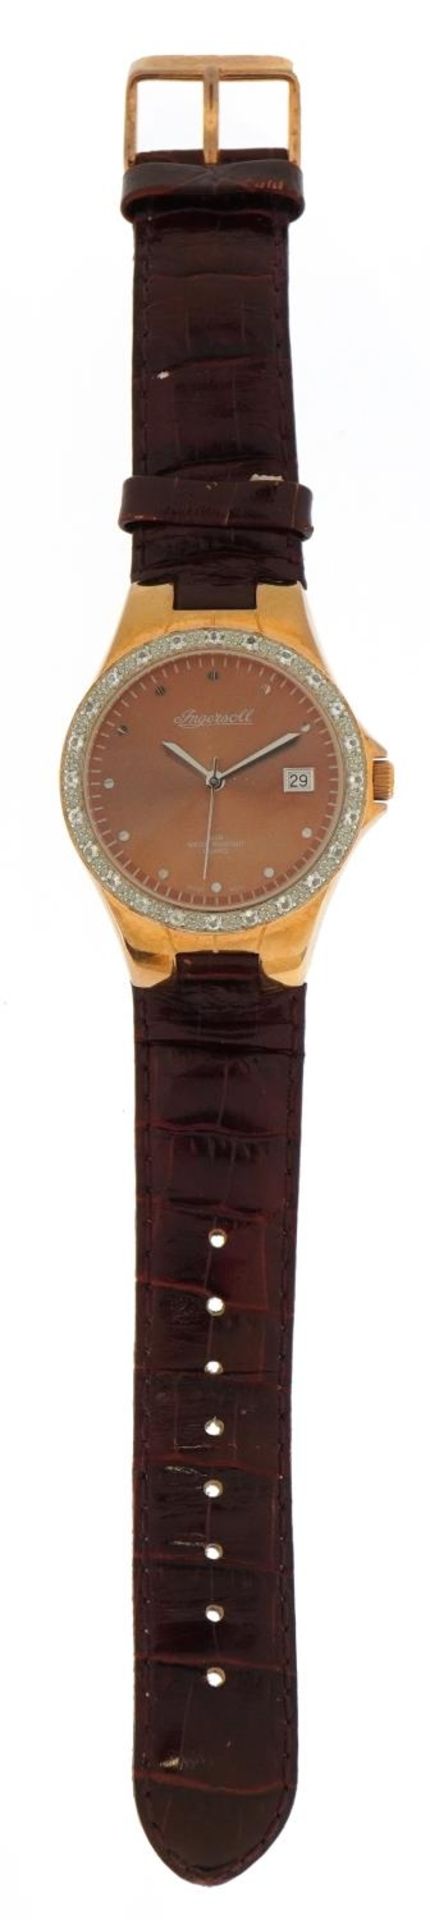 Ladies Ingersoll wristwatch with date aperture and box, the case numbered IG0319, 38mm in diameter - Image 2 of 6